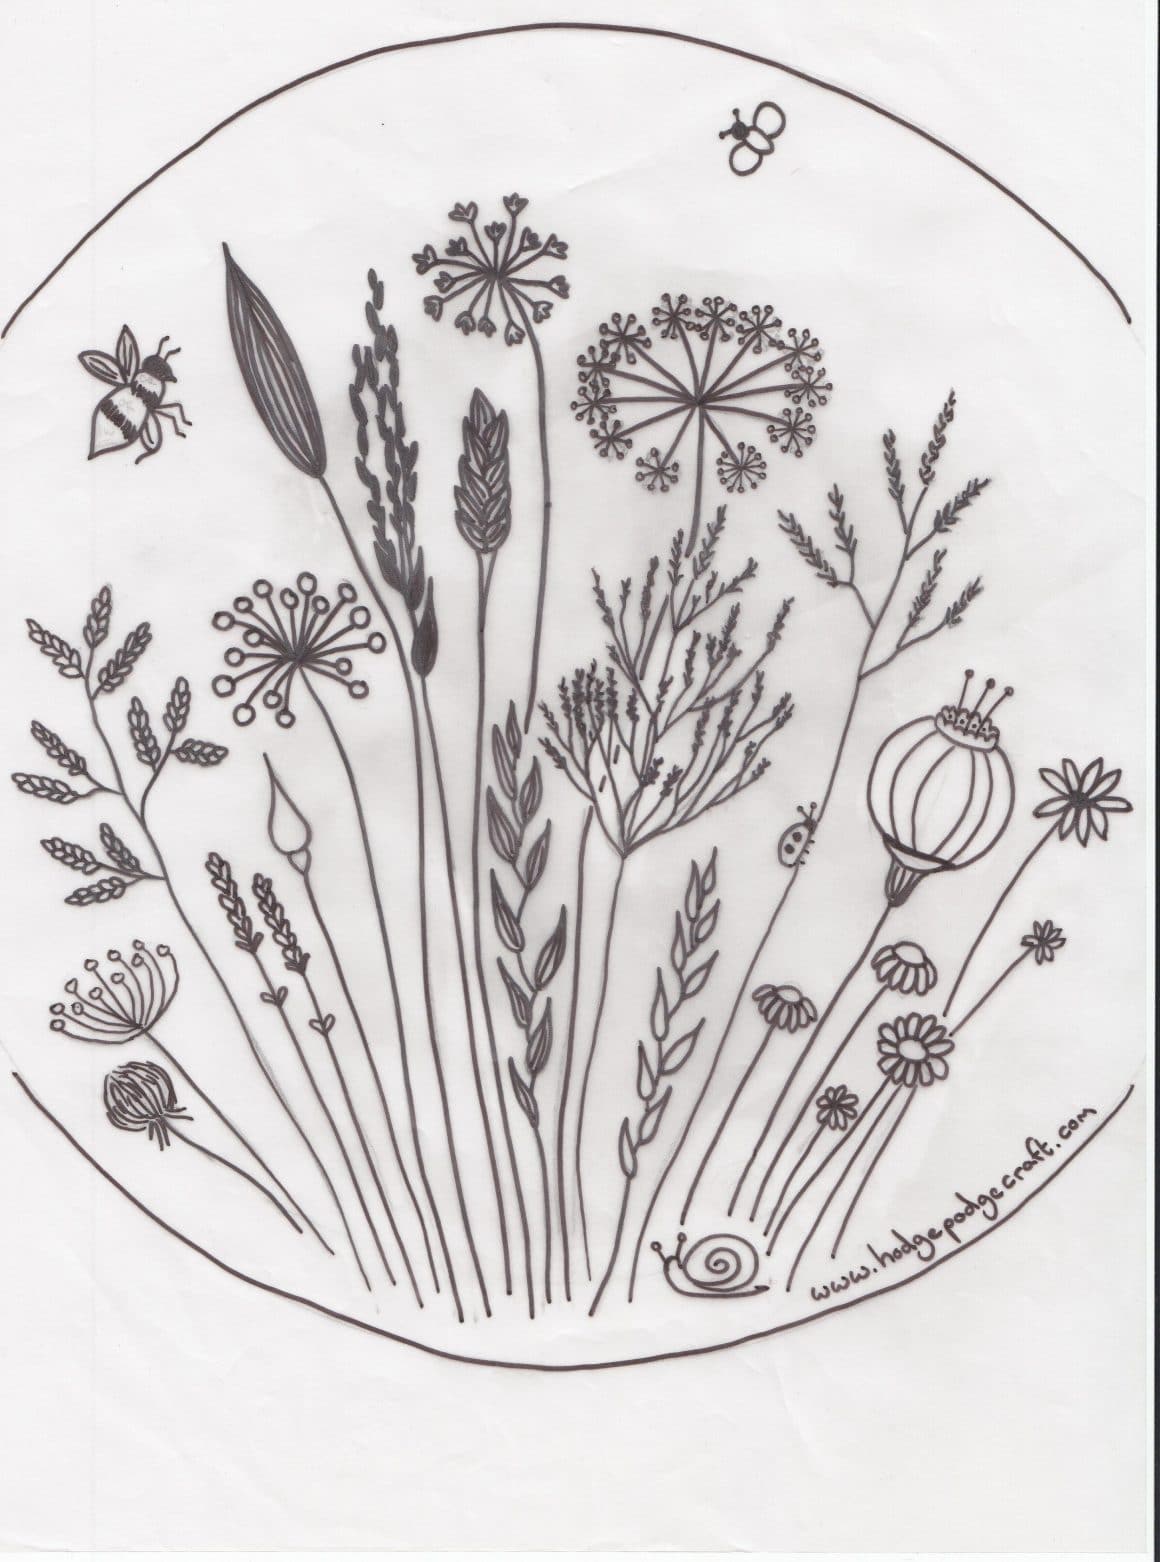 Free Floral Meadow Embroidery Pattern Crewel Embroidery Patterns Embroidery Patterns Embroidery Patterns Free